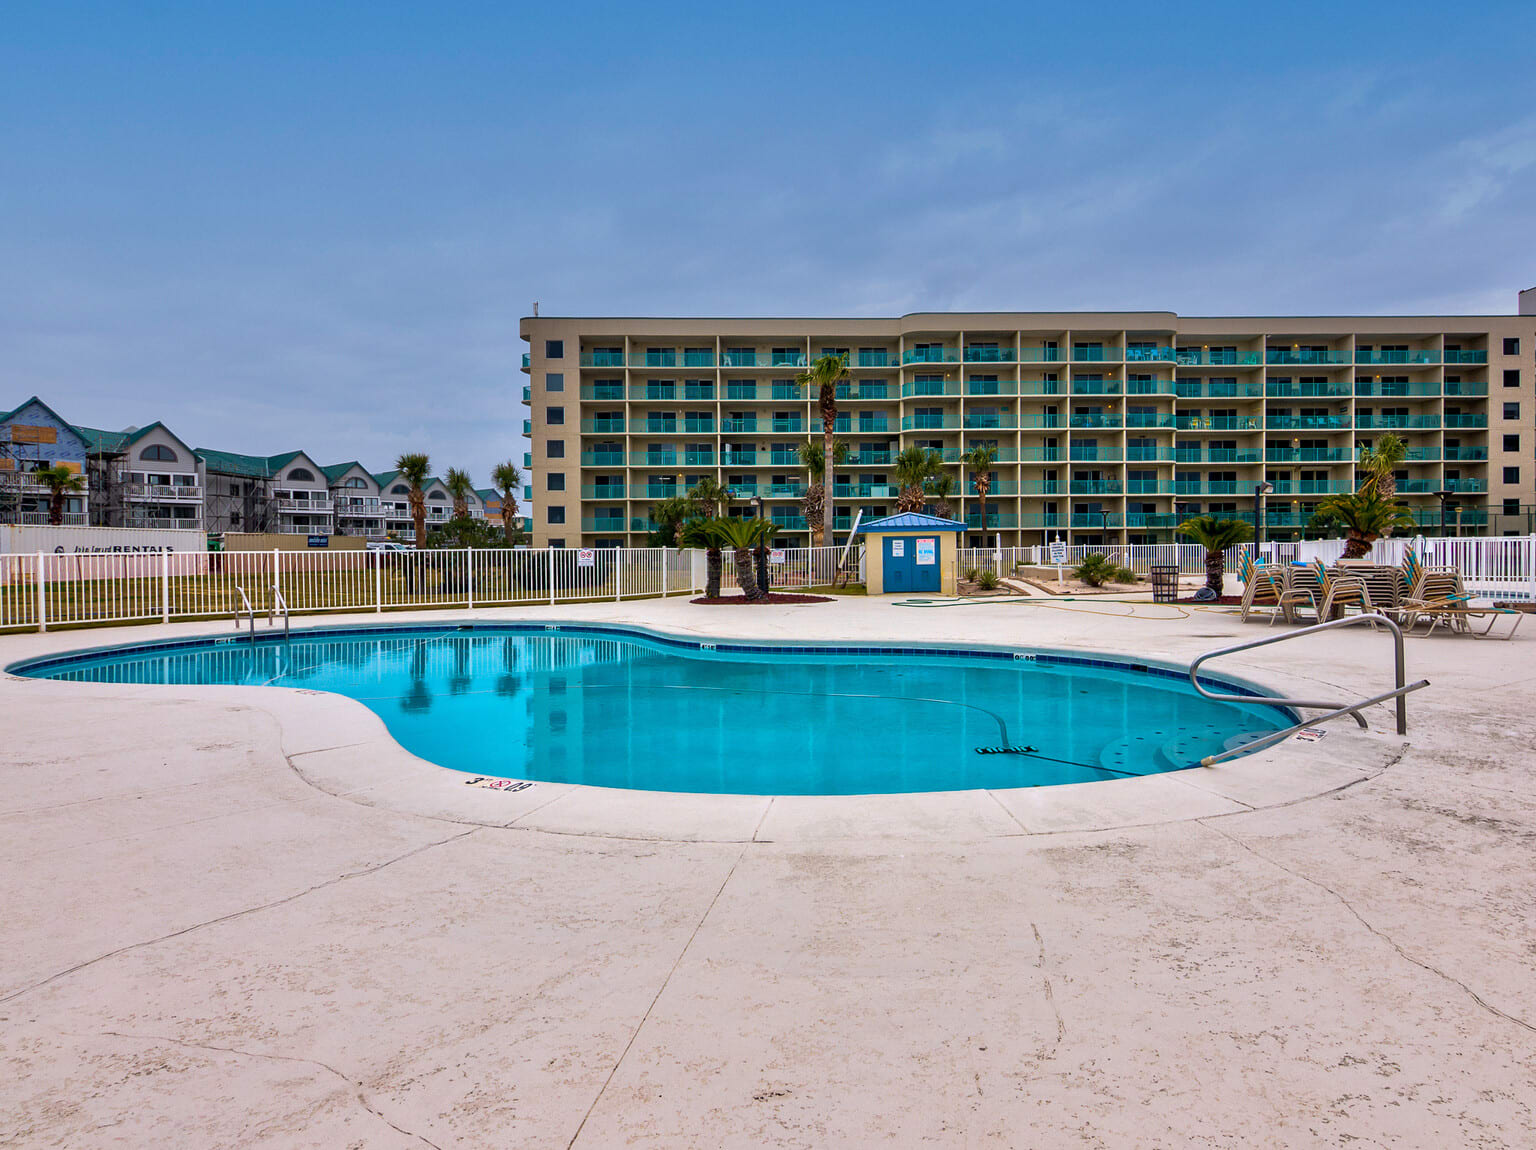 Condo in Fort Morgan with pools and hot tubs | Photo 3